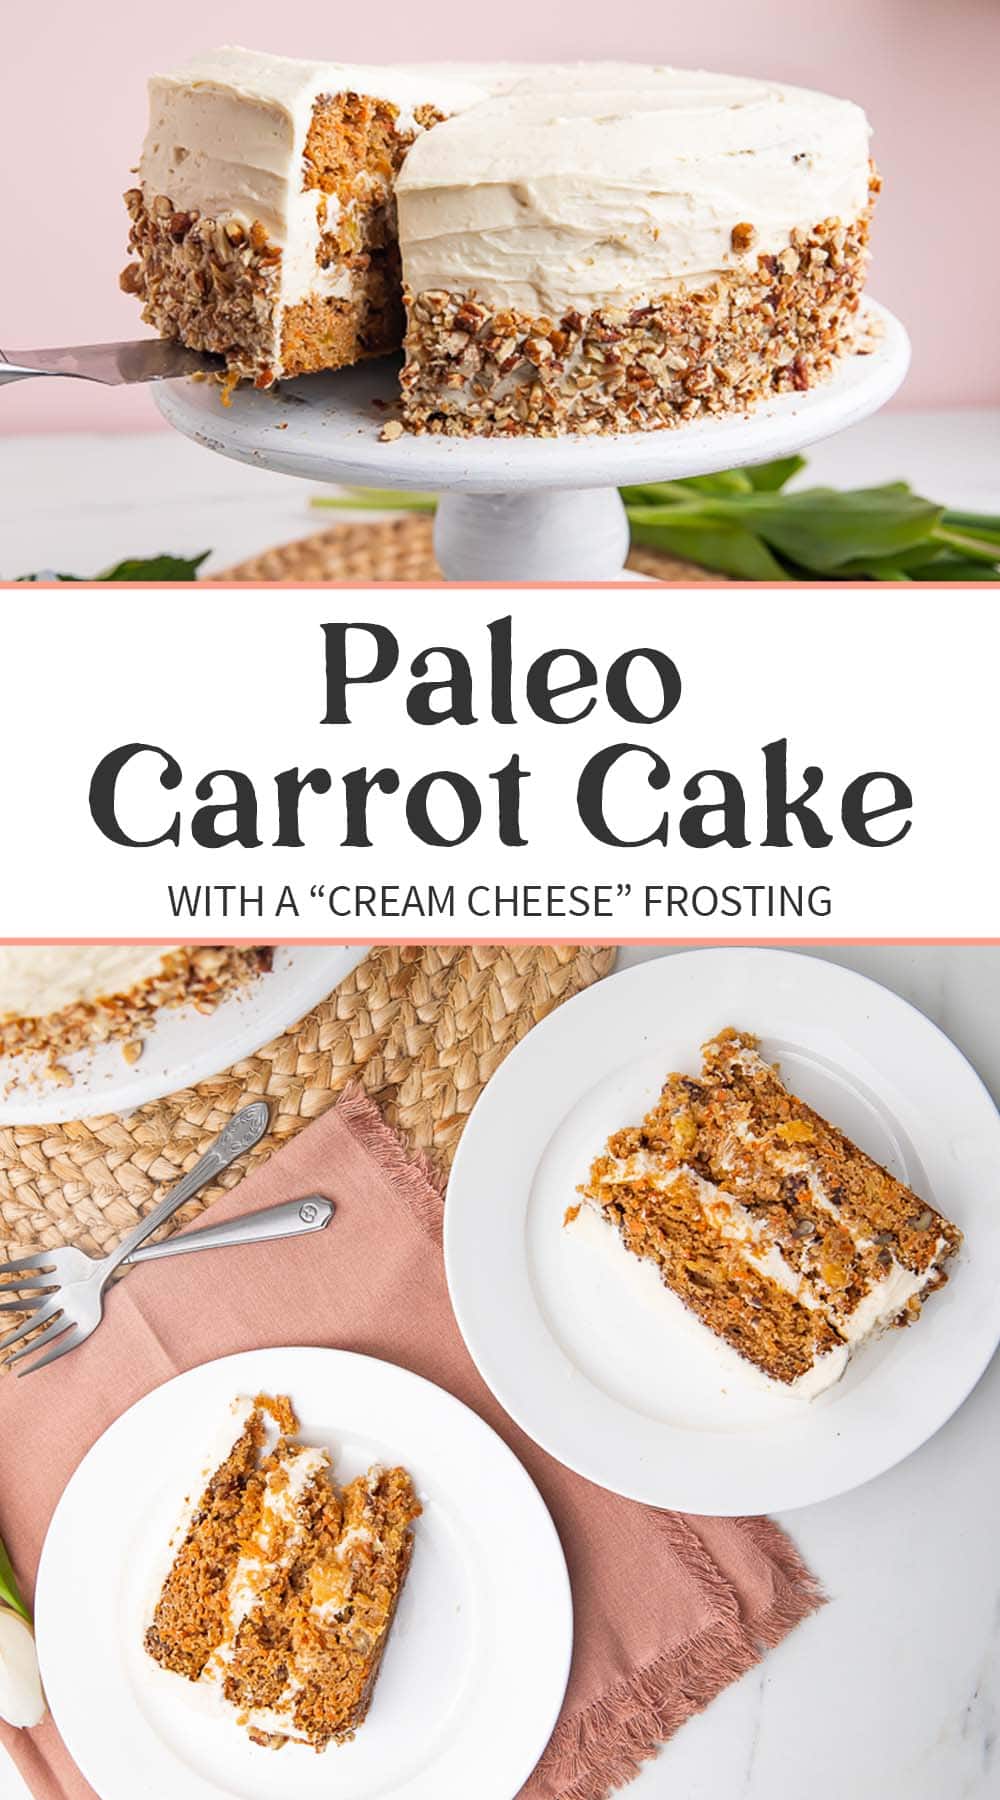 Pin graphic for paleo carrot cake.